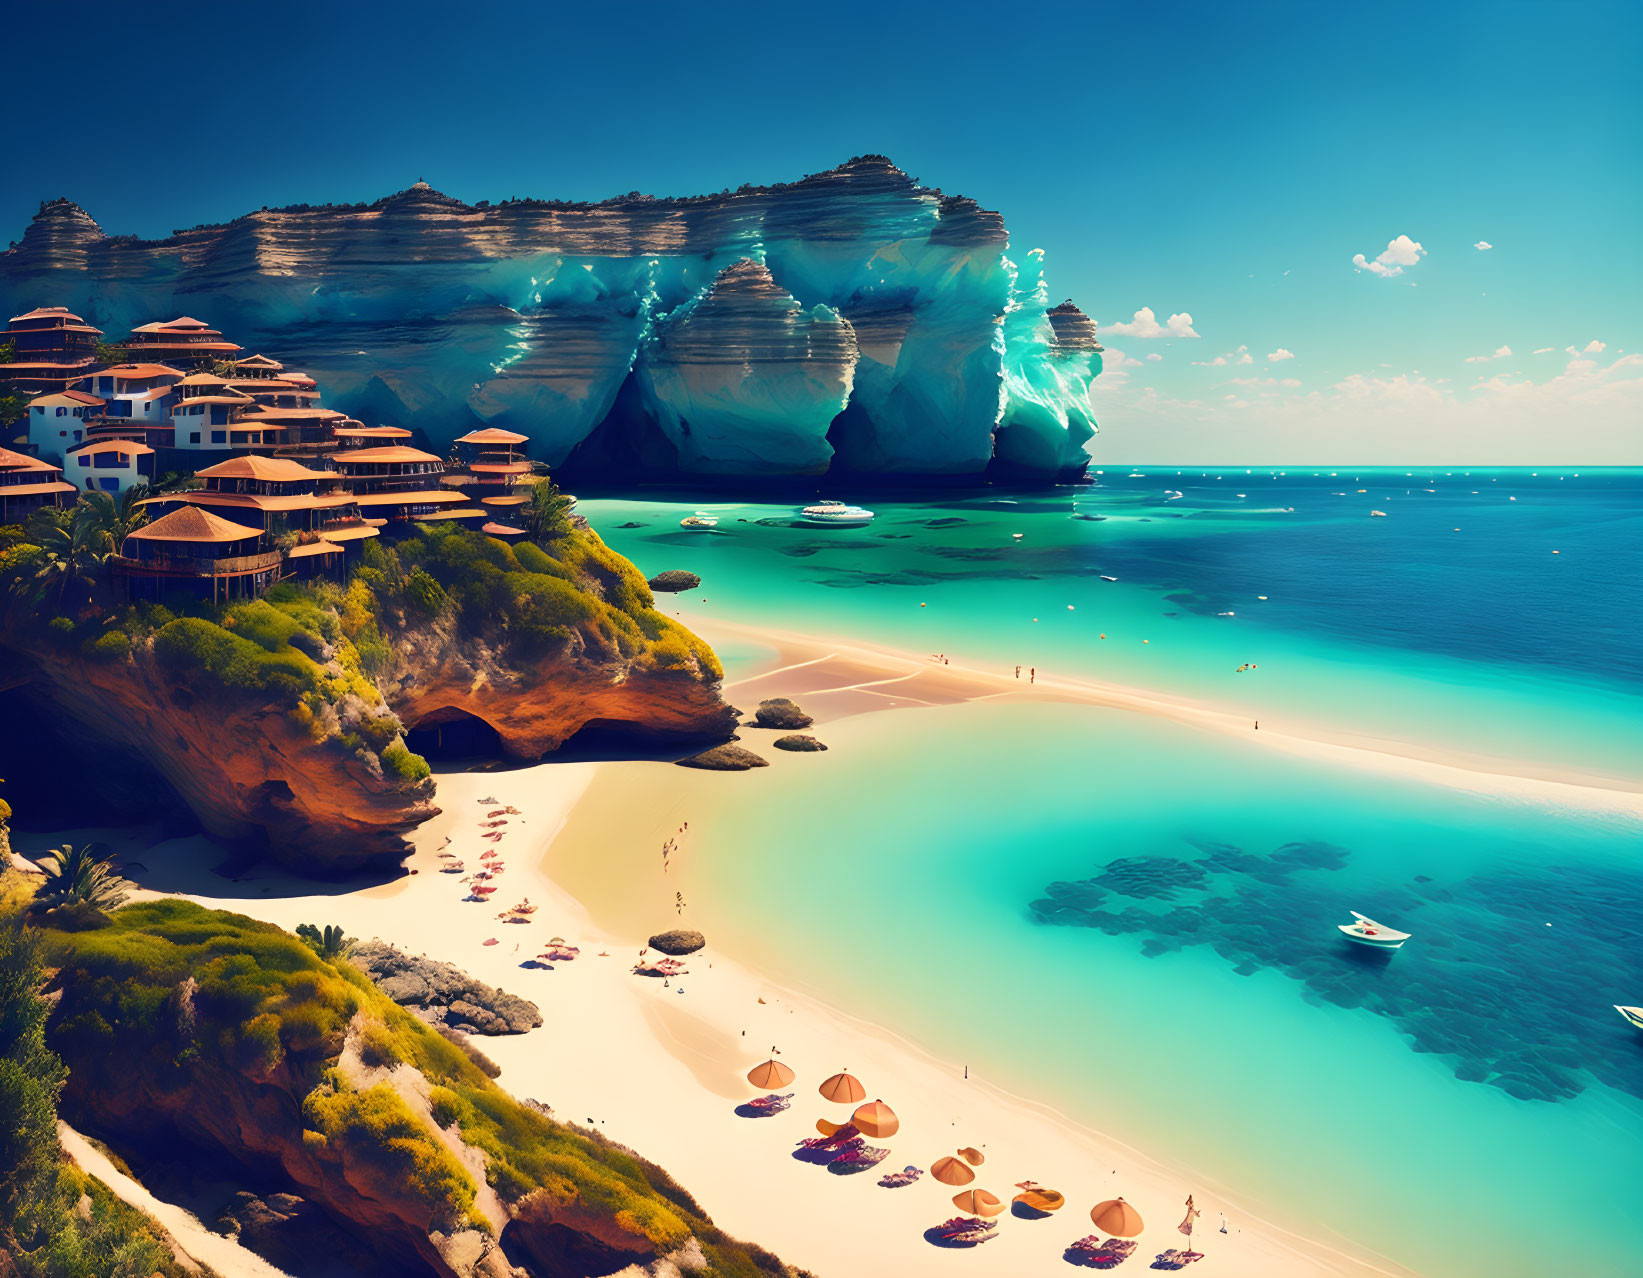 Coastal landscape: towering cliffs, sandy beach, turquoise waters, boats, cliffside houses,